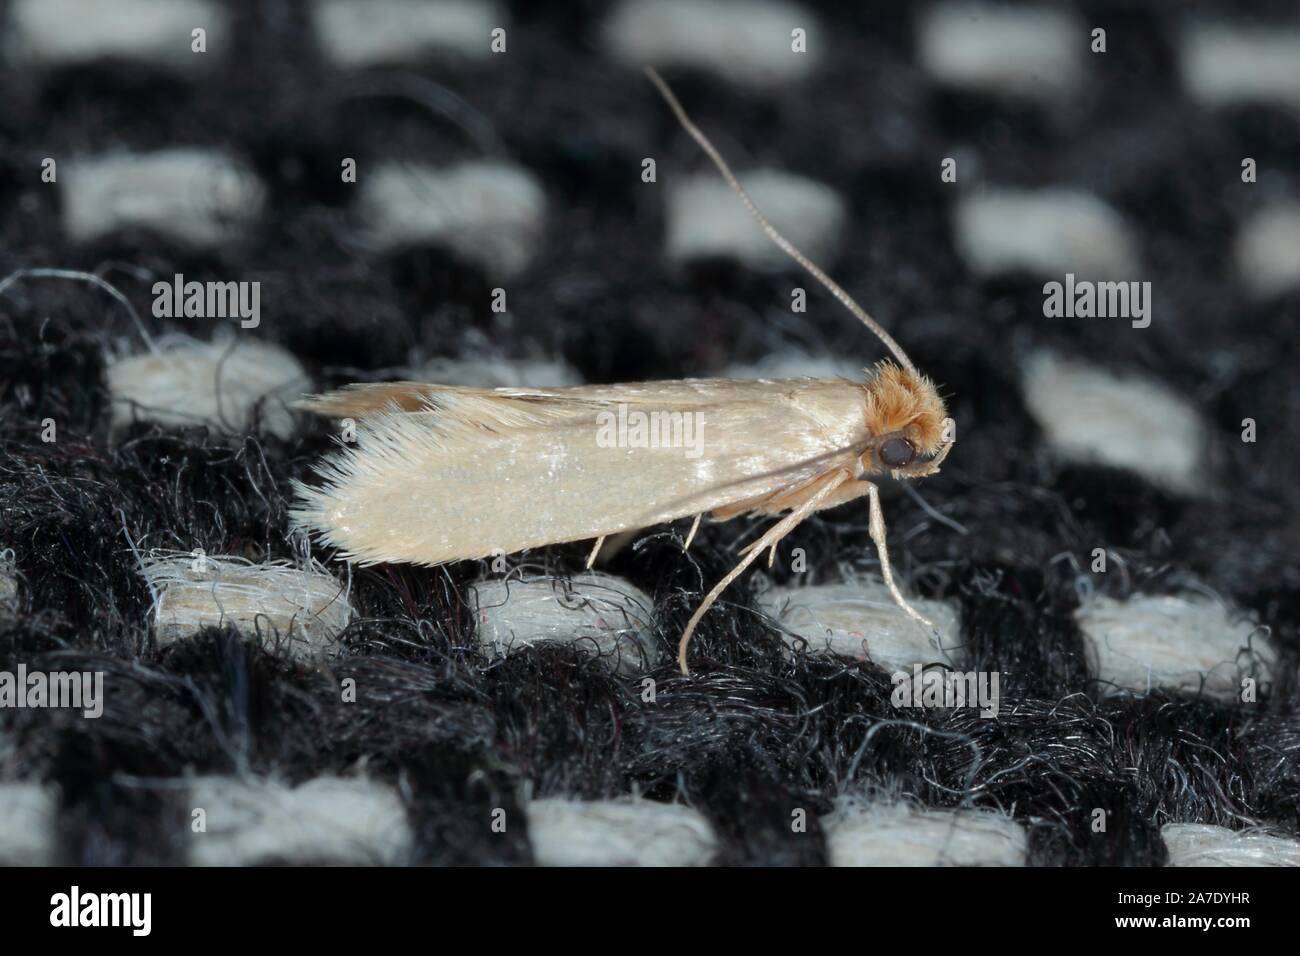 Tineola bisselliella known as the common clothes moth, webbing clothes ...